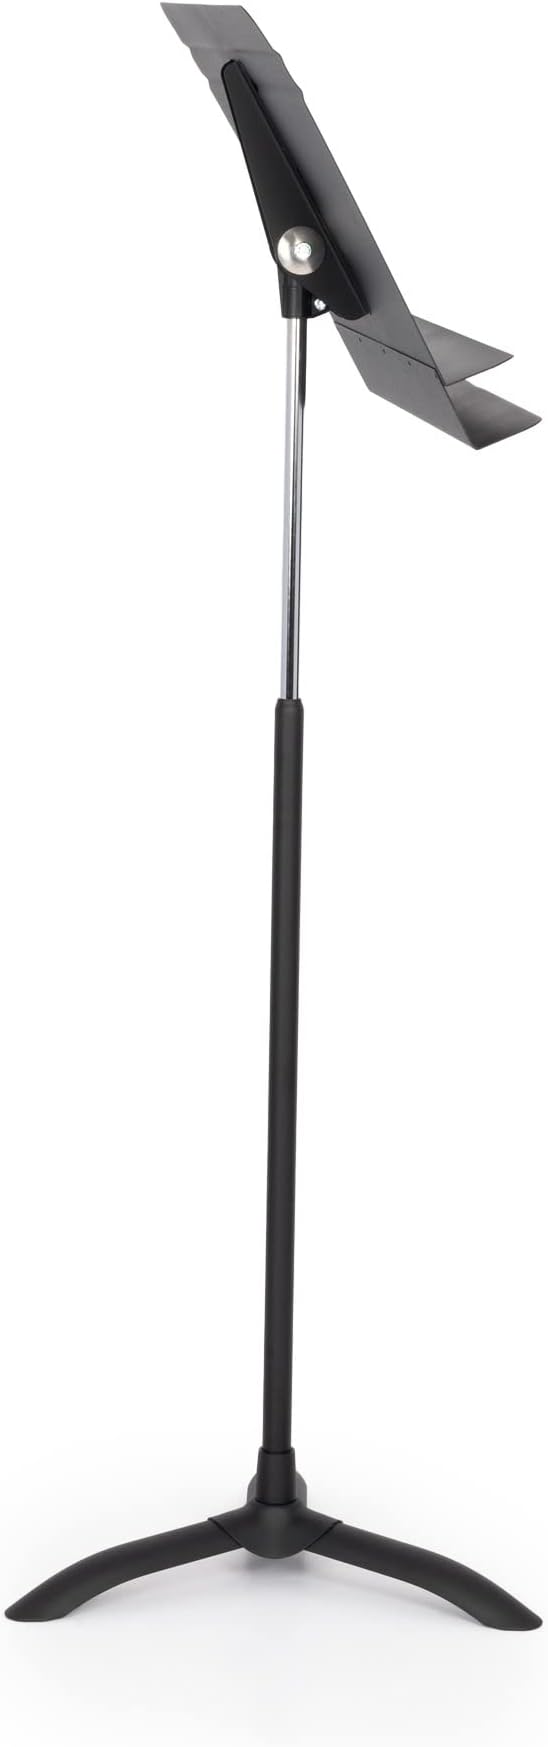 Manhasset - Orchestral Double Lip Music Stand